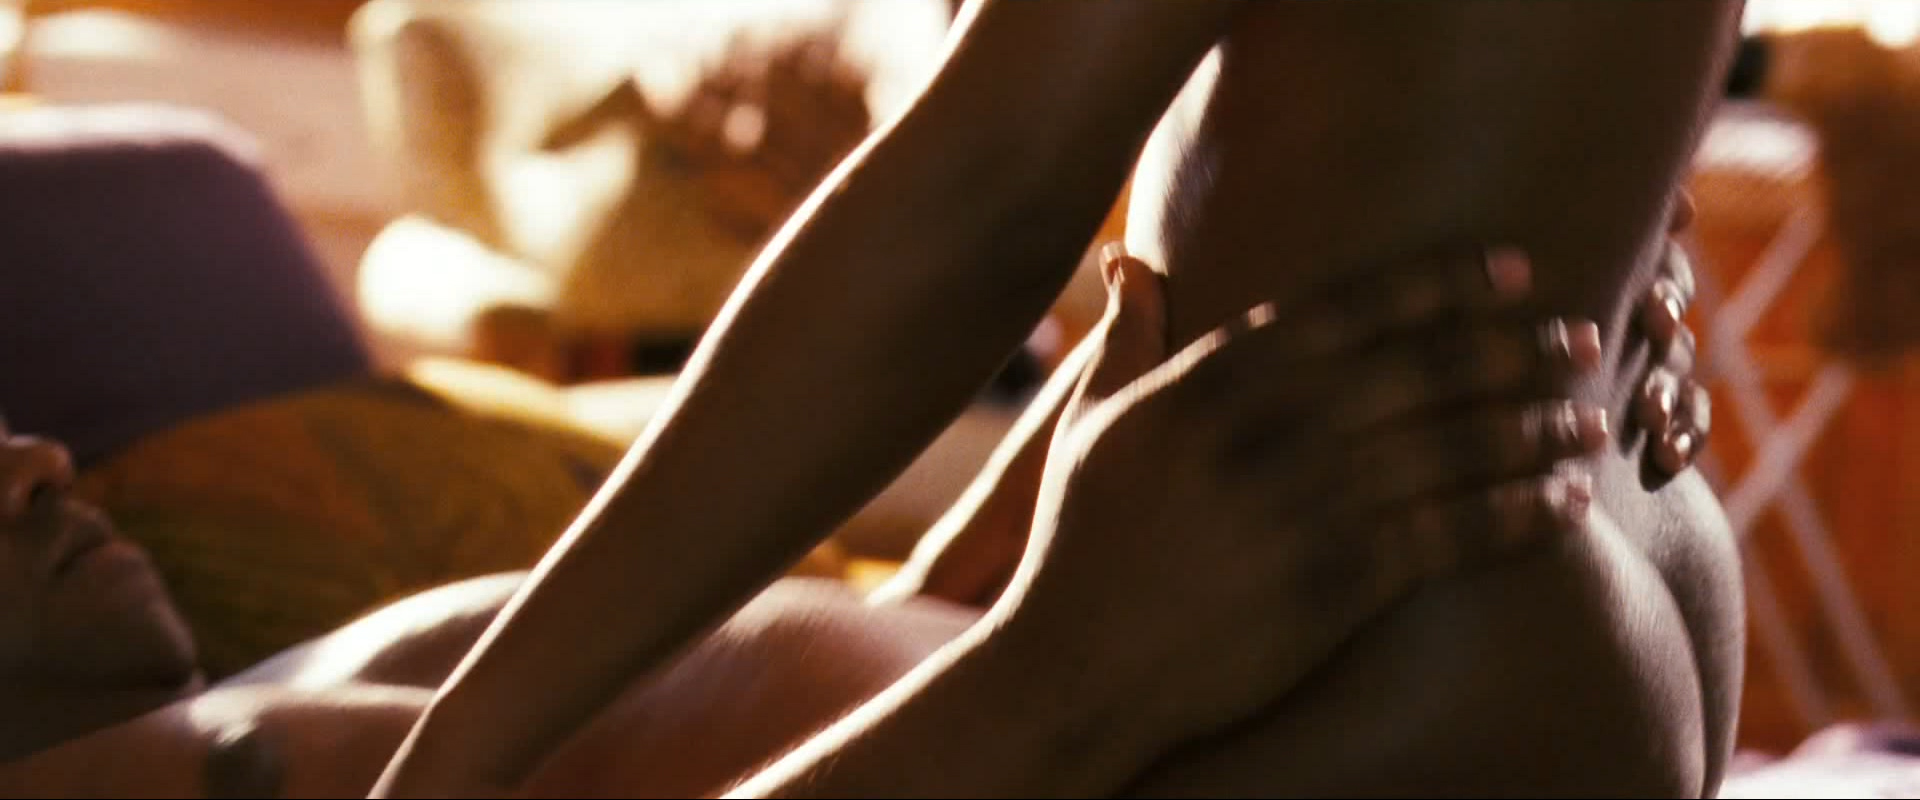 Naturi Naughton (25 y.o.) from nude clip in Notorious (2009). 